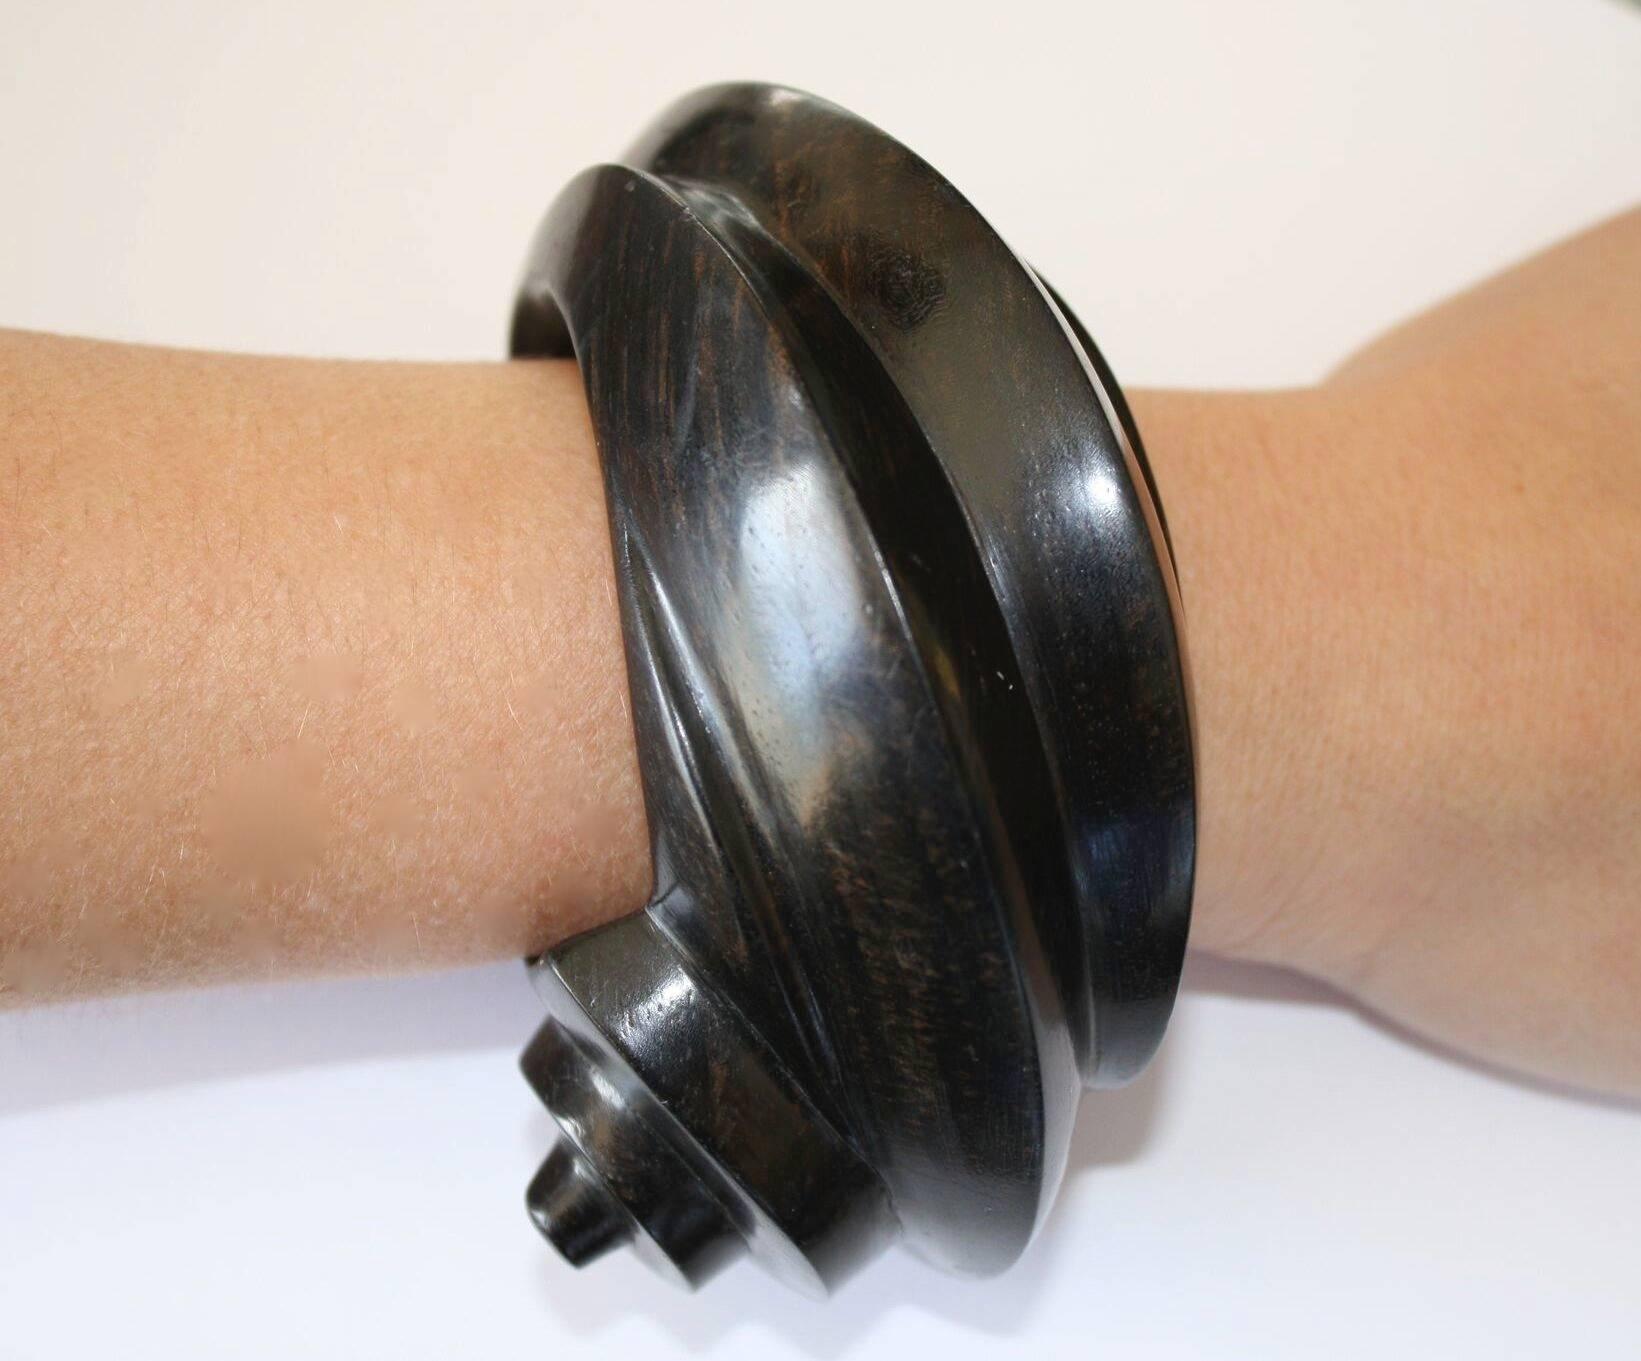 Patricia Von Musulin ebony bracelet - rare one of a kind, carved from single block of wood.

Opening is 1.5”, inside wrist size 5”, width 2"

Designer biography:  Dedicated to experimentation and exploration, Patricia von Musulin has worked